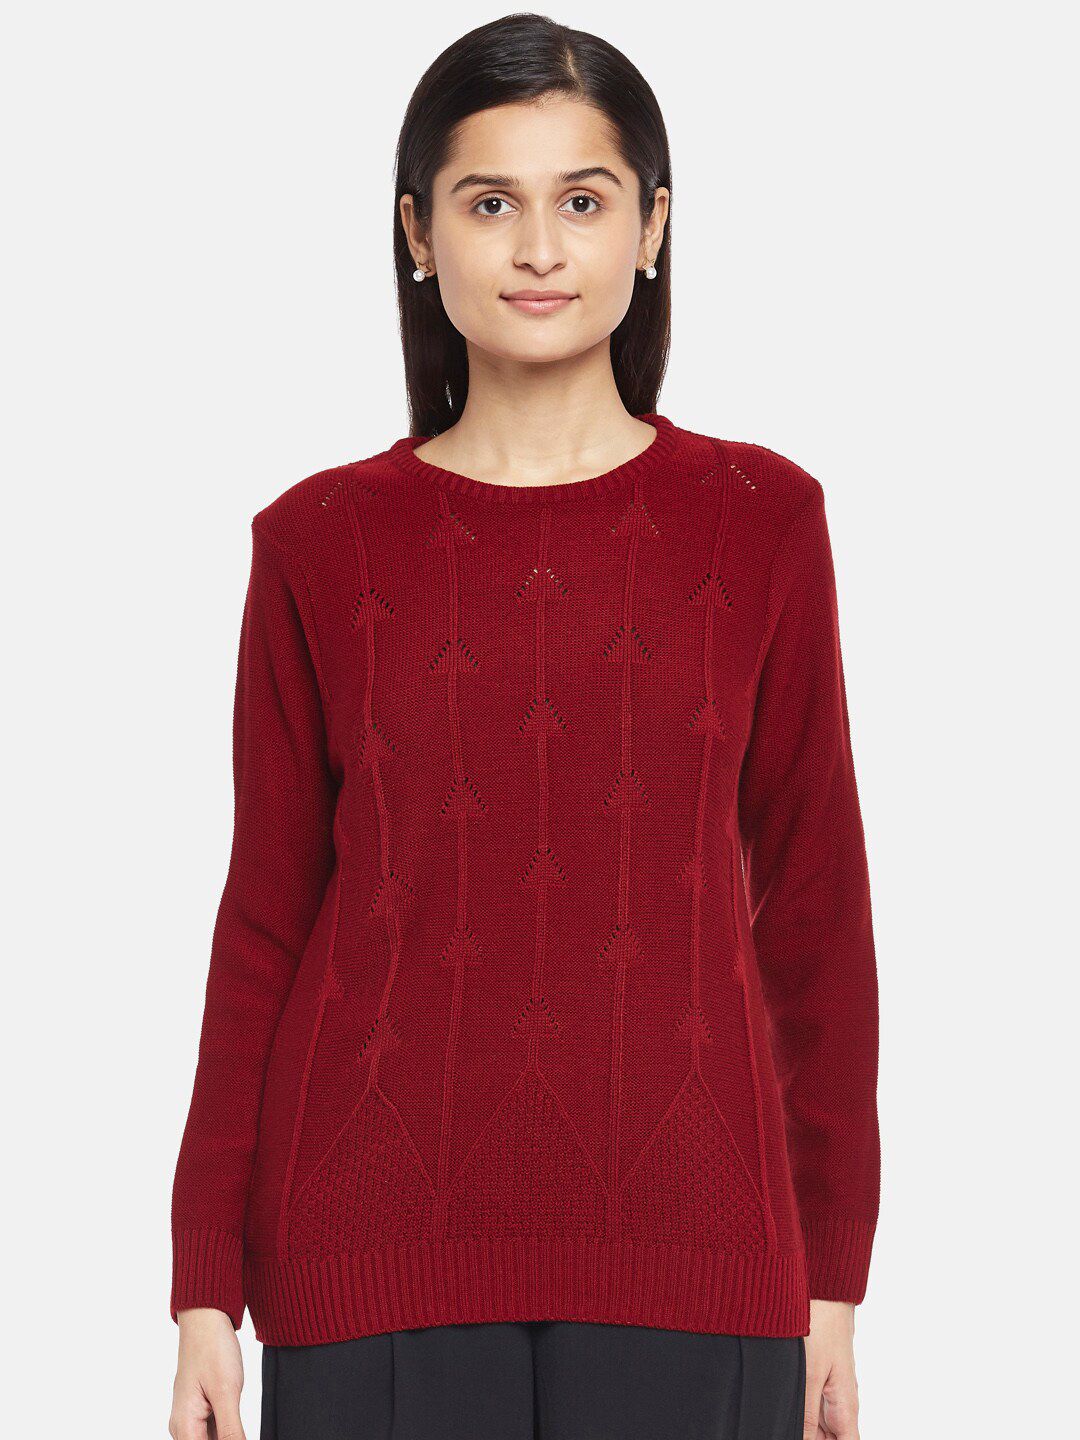 Honey by Pantaloons Women Red Acrylic Cardigan Price in India